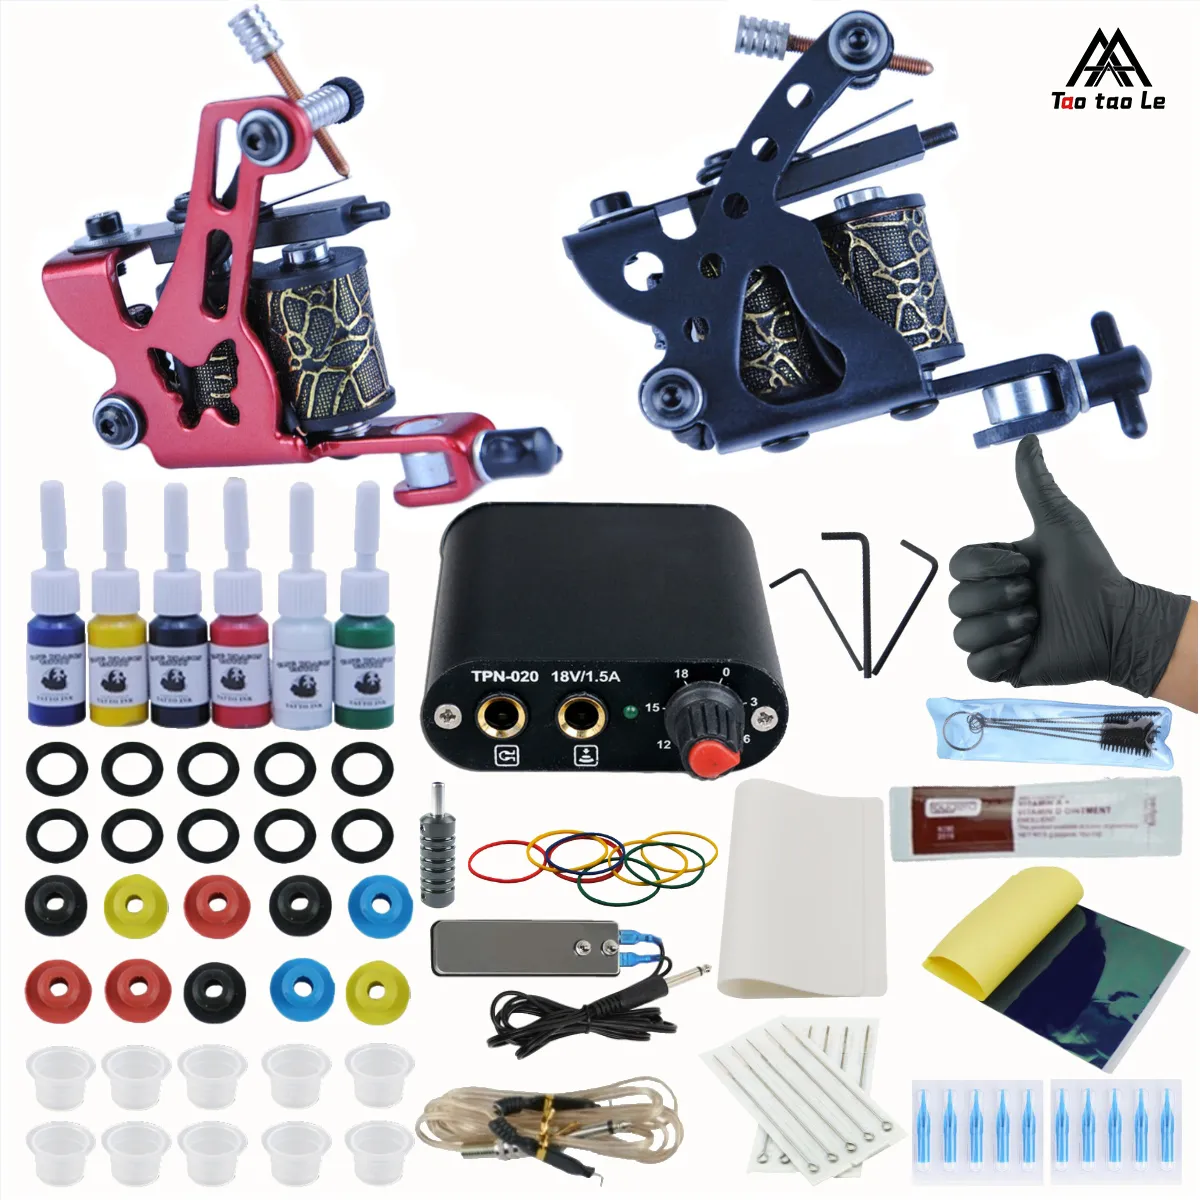 Share 92+ about tattoo machine full kit unmissable .vn